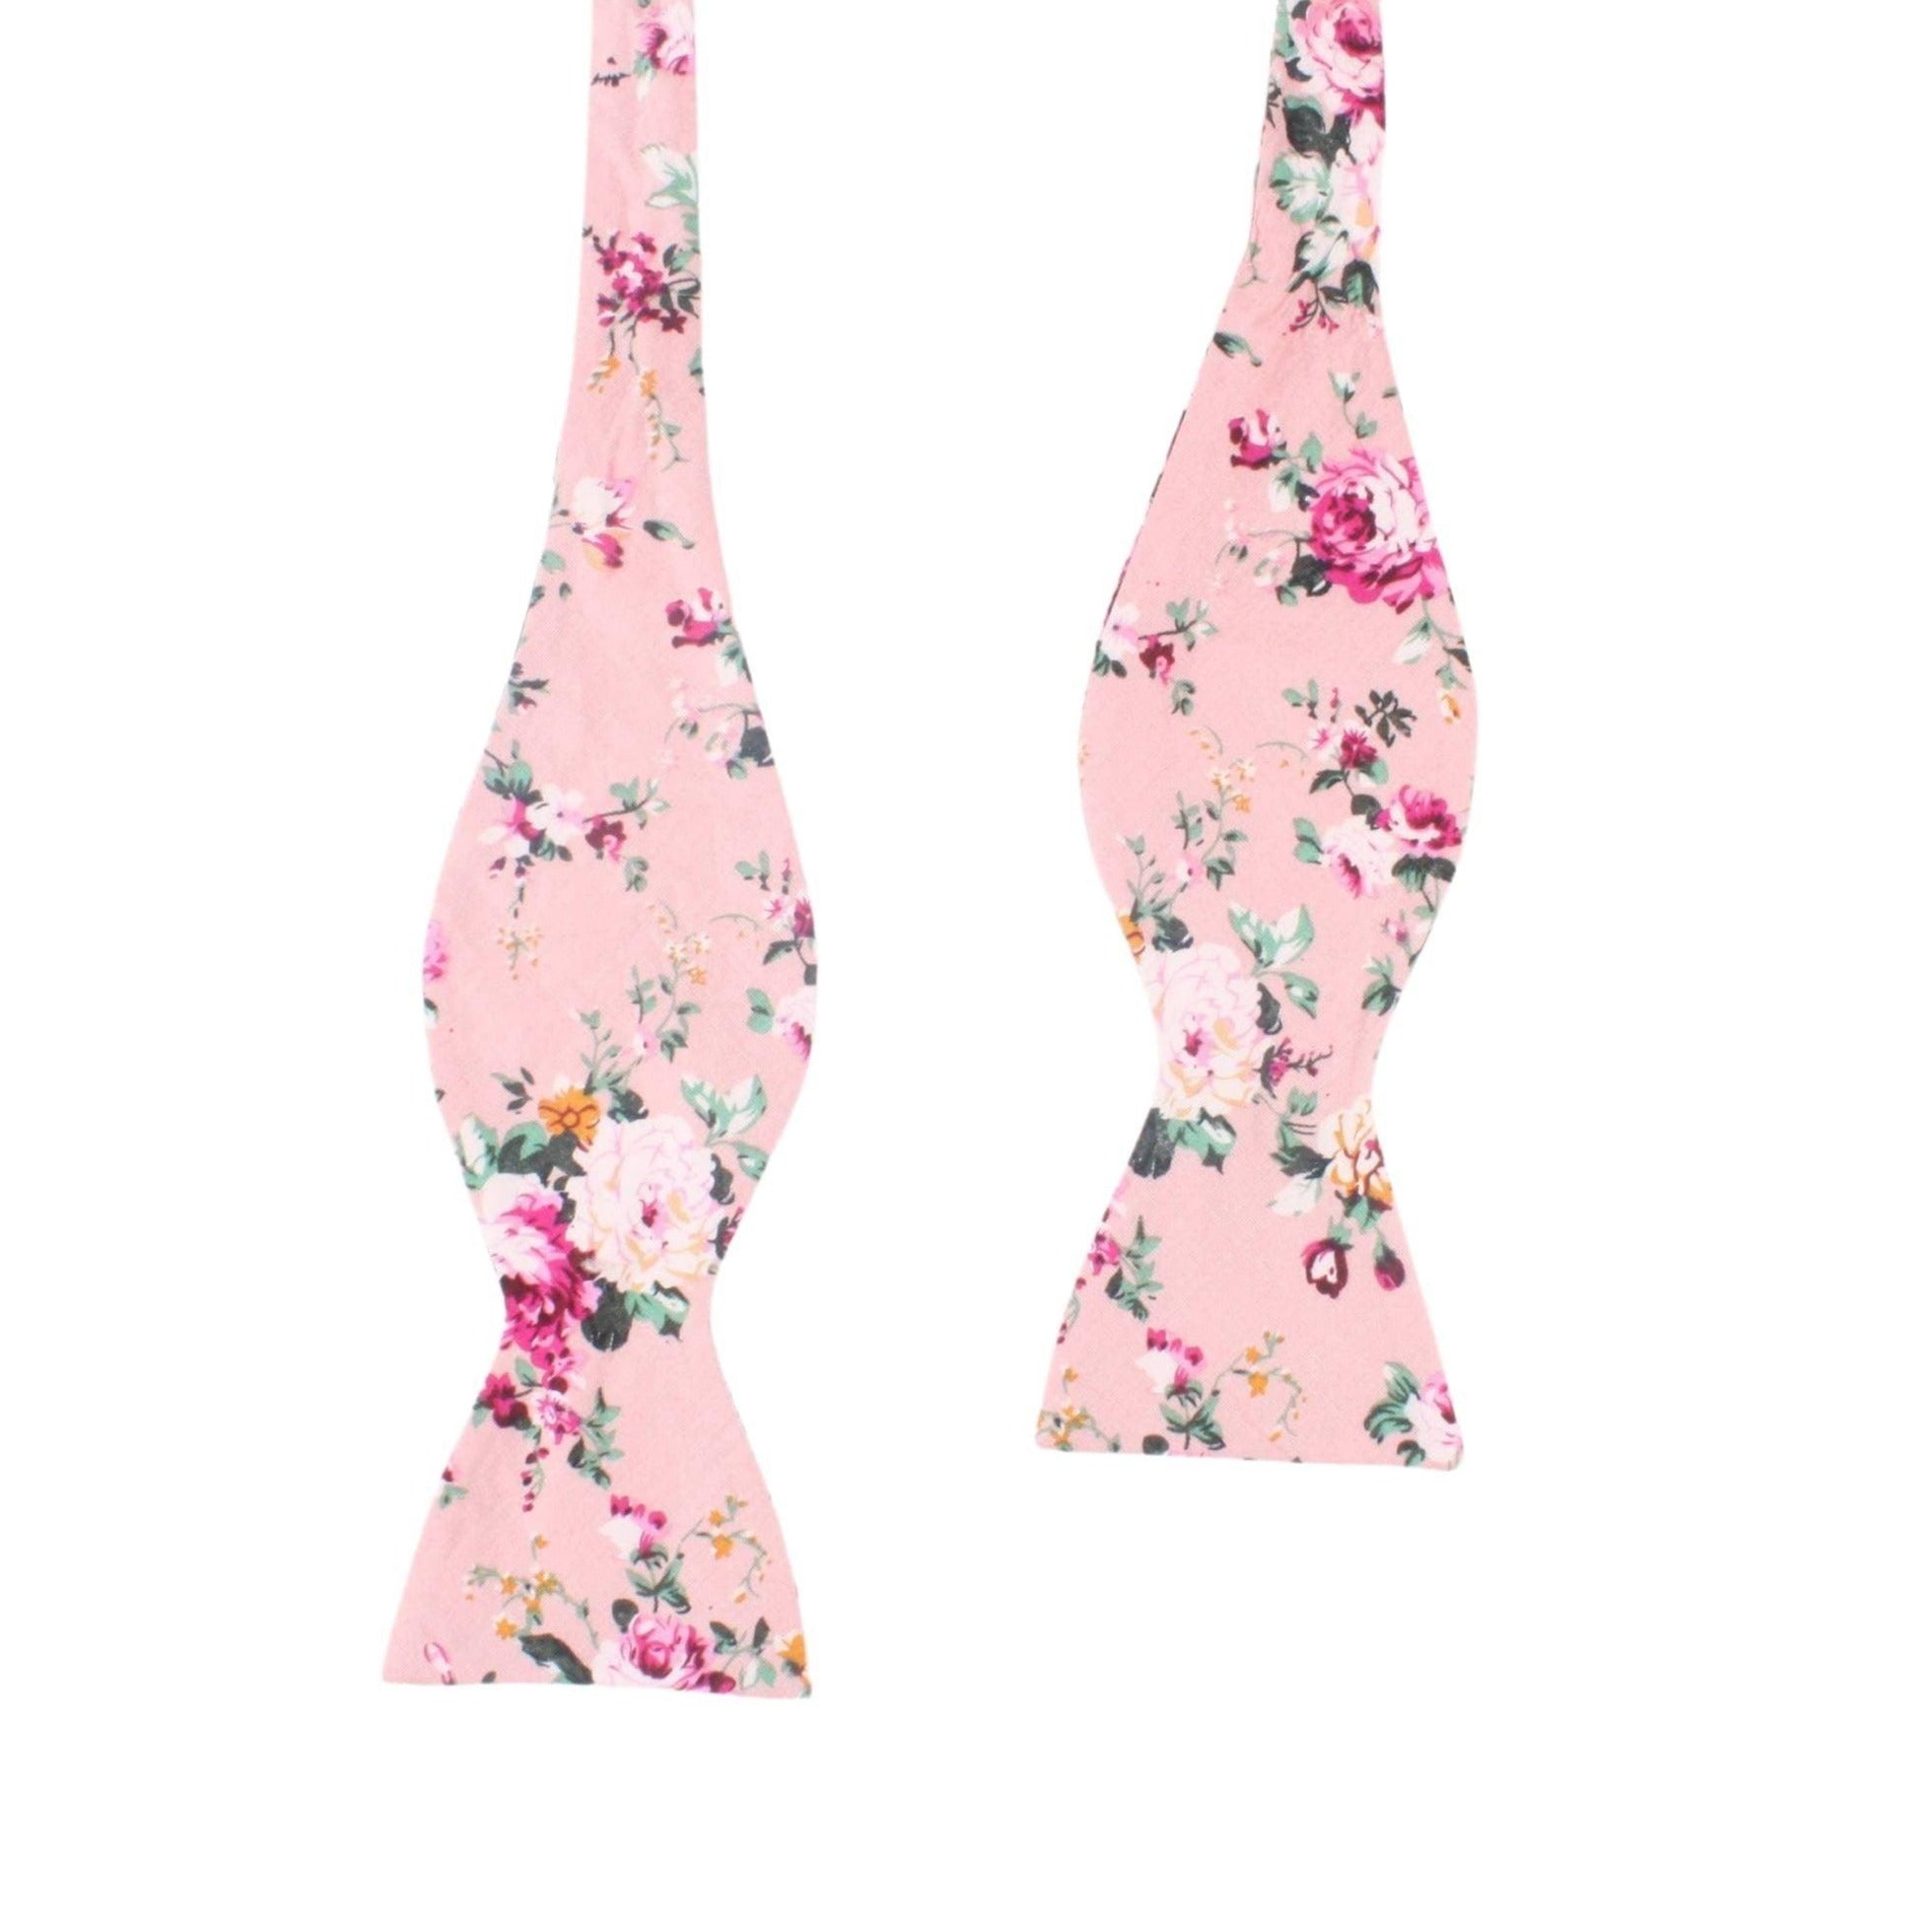 Pink Floral Bow Tie Self Tie MILLIE MYTIESHOP-You&#39;ll be the best dressed groom and groomsmen with this pink salmon bow tie. A must-have for the groomsmen, this pink salmon bow tie is perfect for any formal occasion. With its light pink and green floral print, this bow tie is sure to add personality to any outfit. Get ready to tie the knot in style with this self-tie bow tie.-Mytieshop